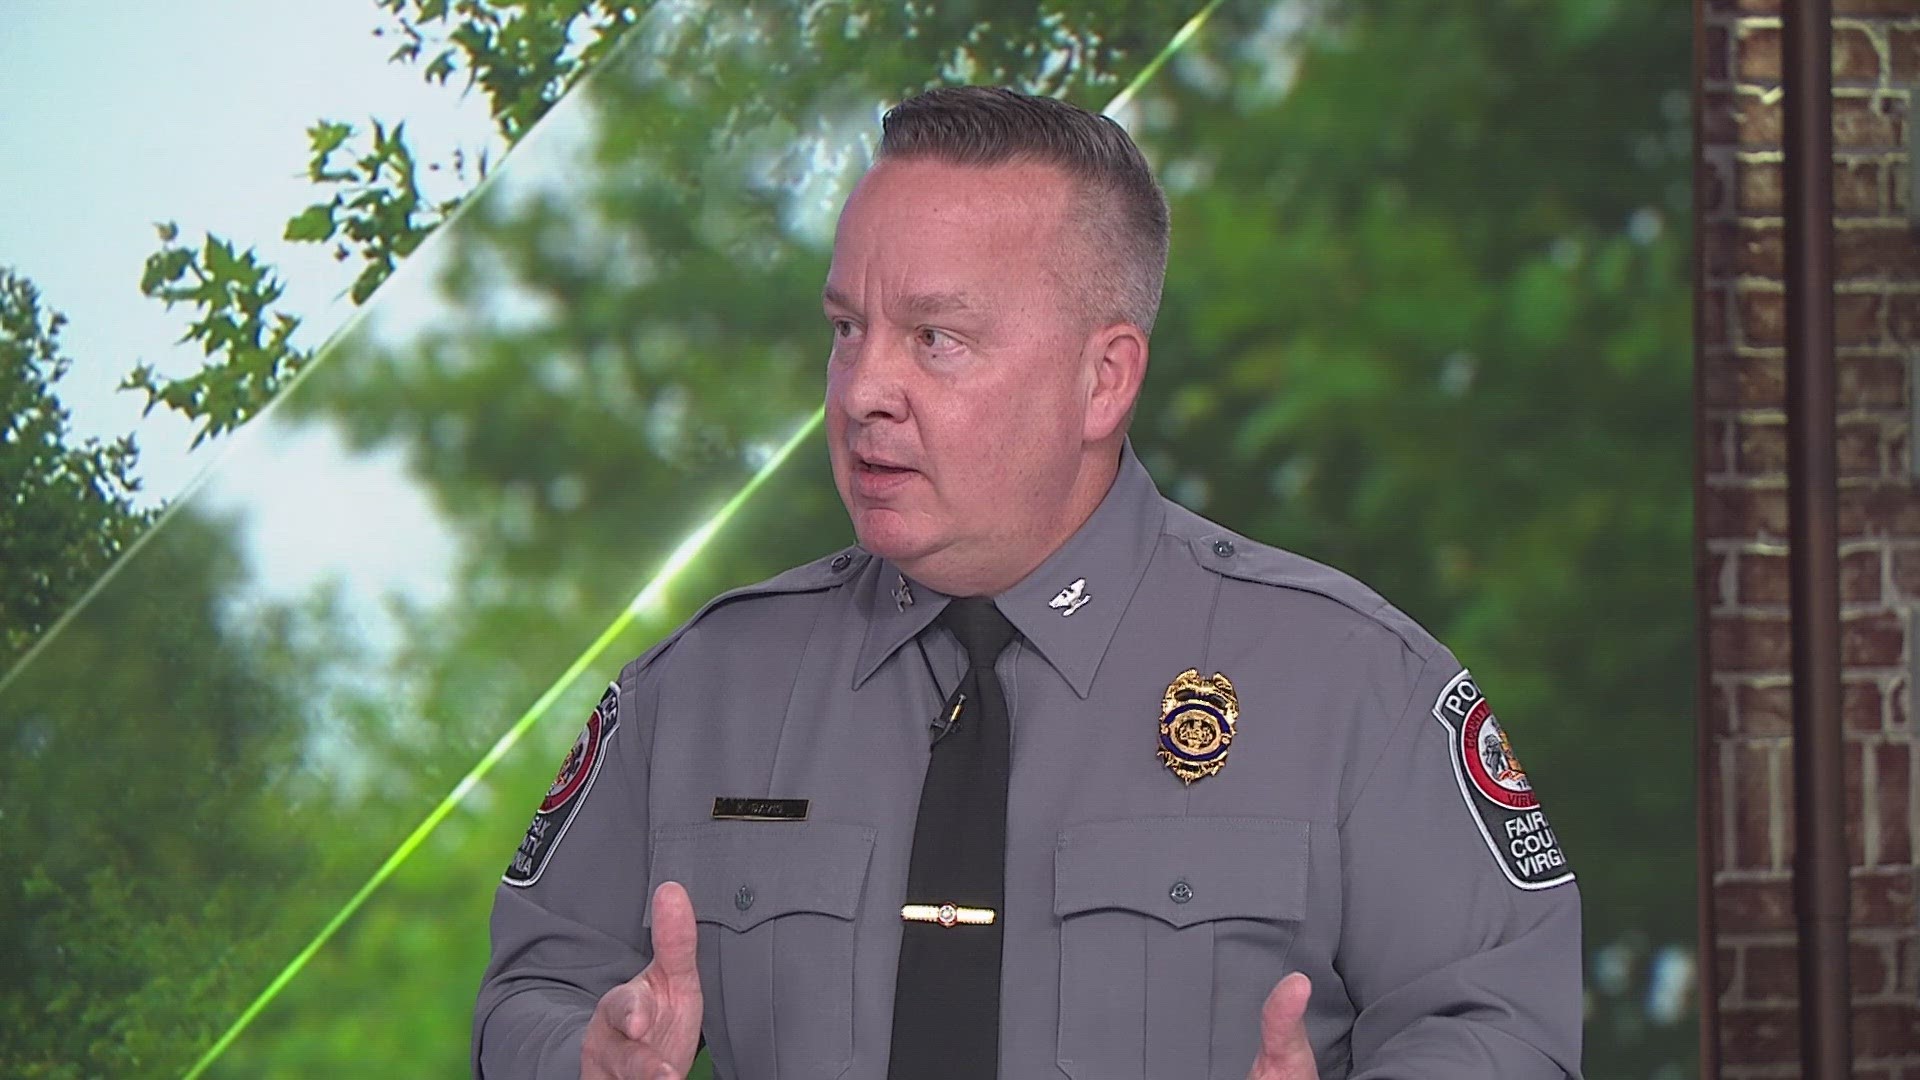 Chief Kevin Davis joined WUSA9 to talk about some of the big cases going on in Fairfax County.